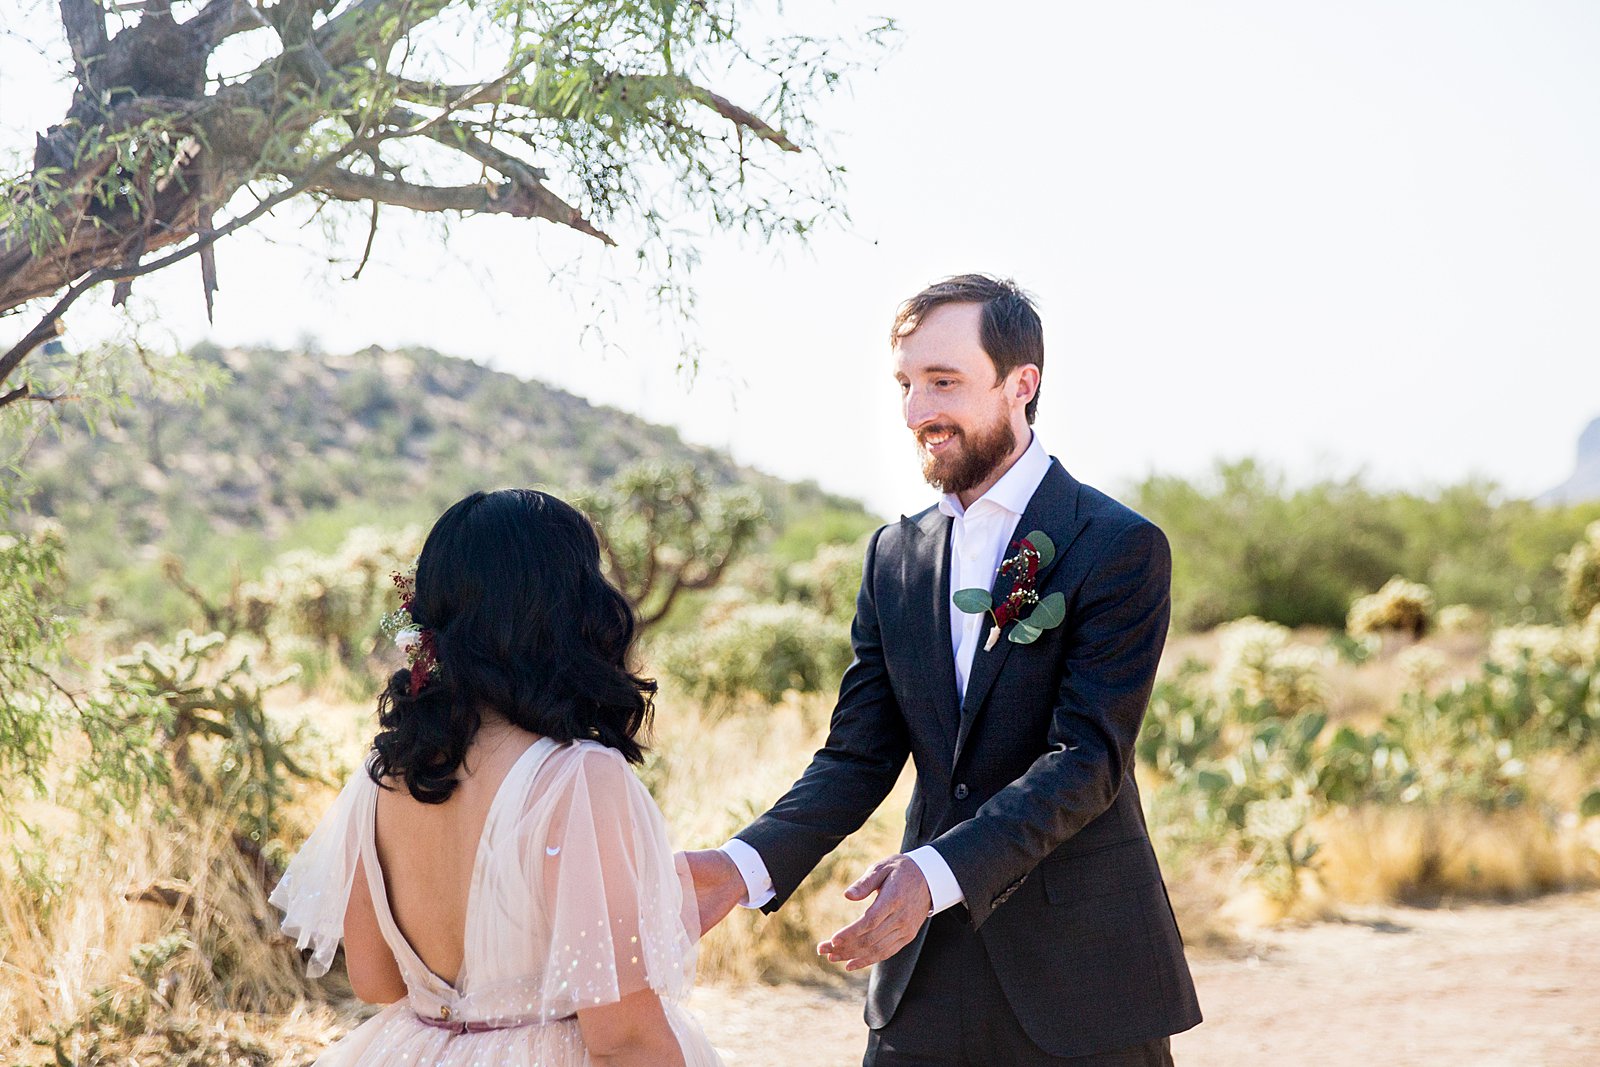 Bride and Groom's first look at Cloth and Flame Superstition Mountain by Phoenix wedding photographer PMA Photography.